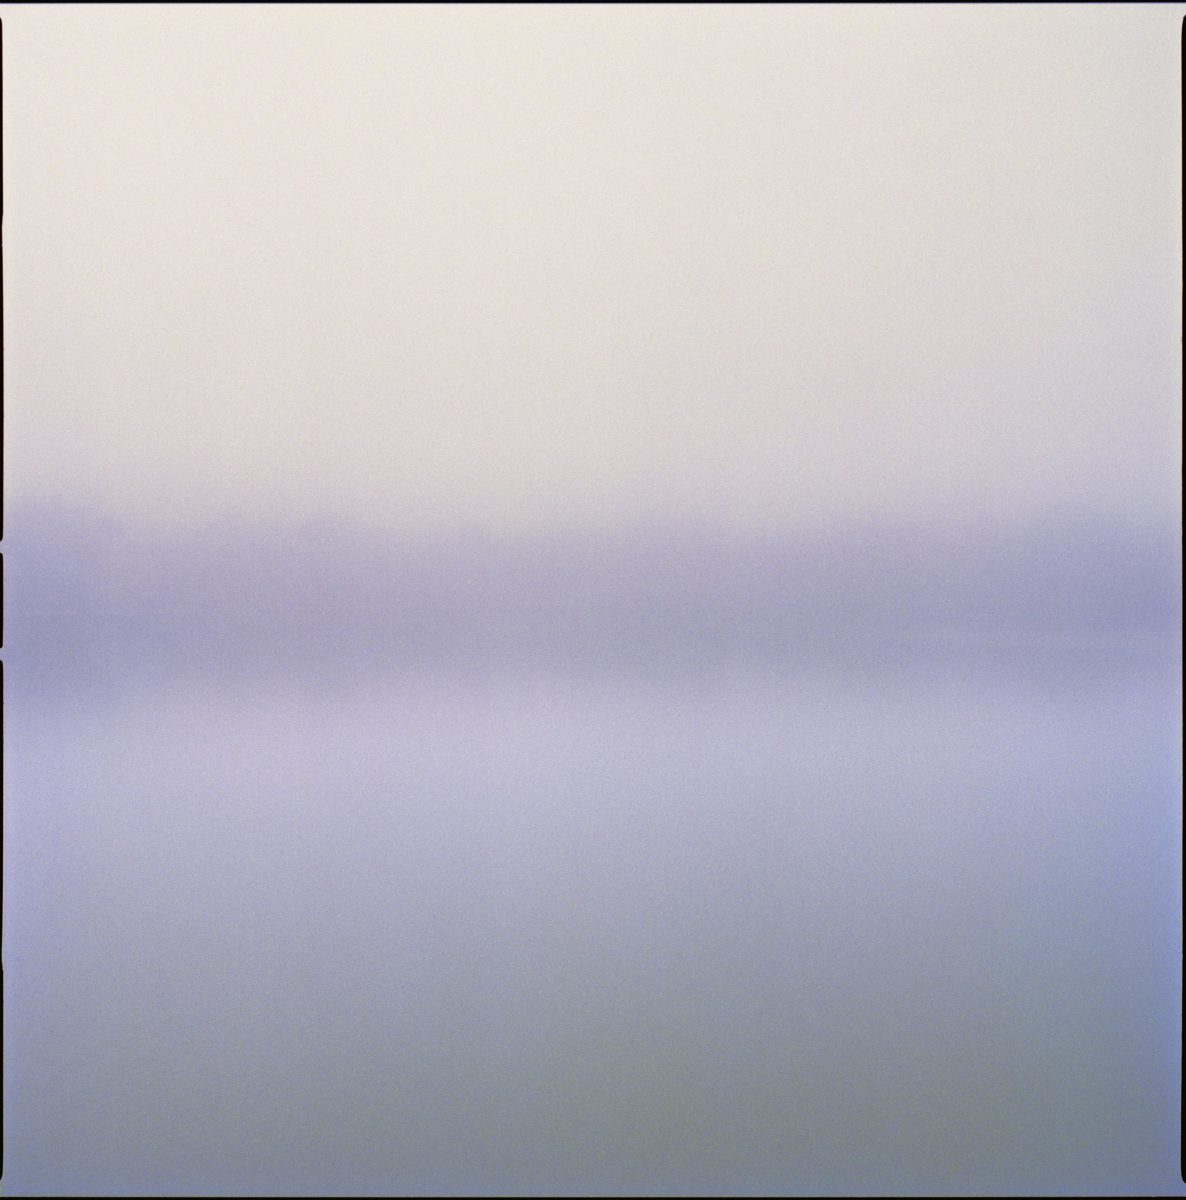 Lake III by Nigel Parry from the Landscapes series, trees by the lake in green and purple mist